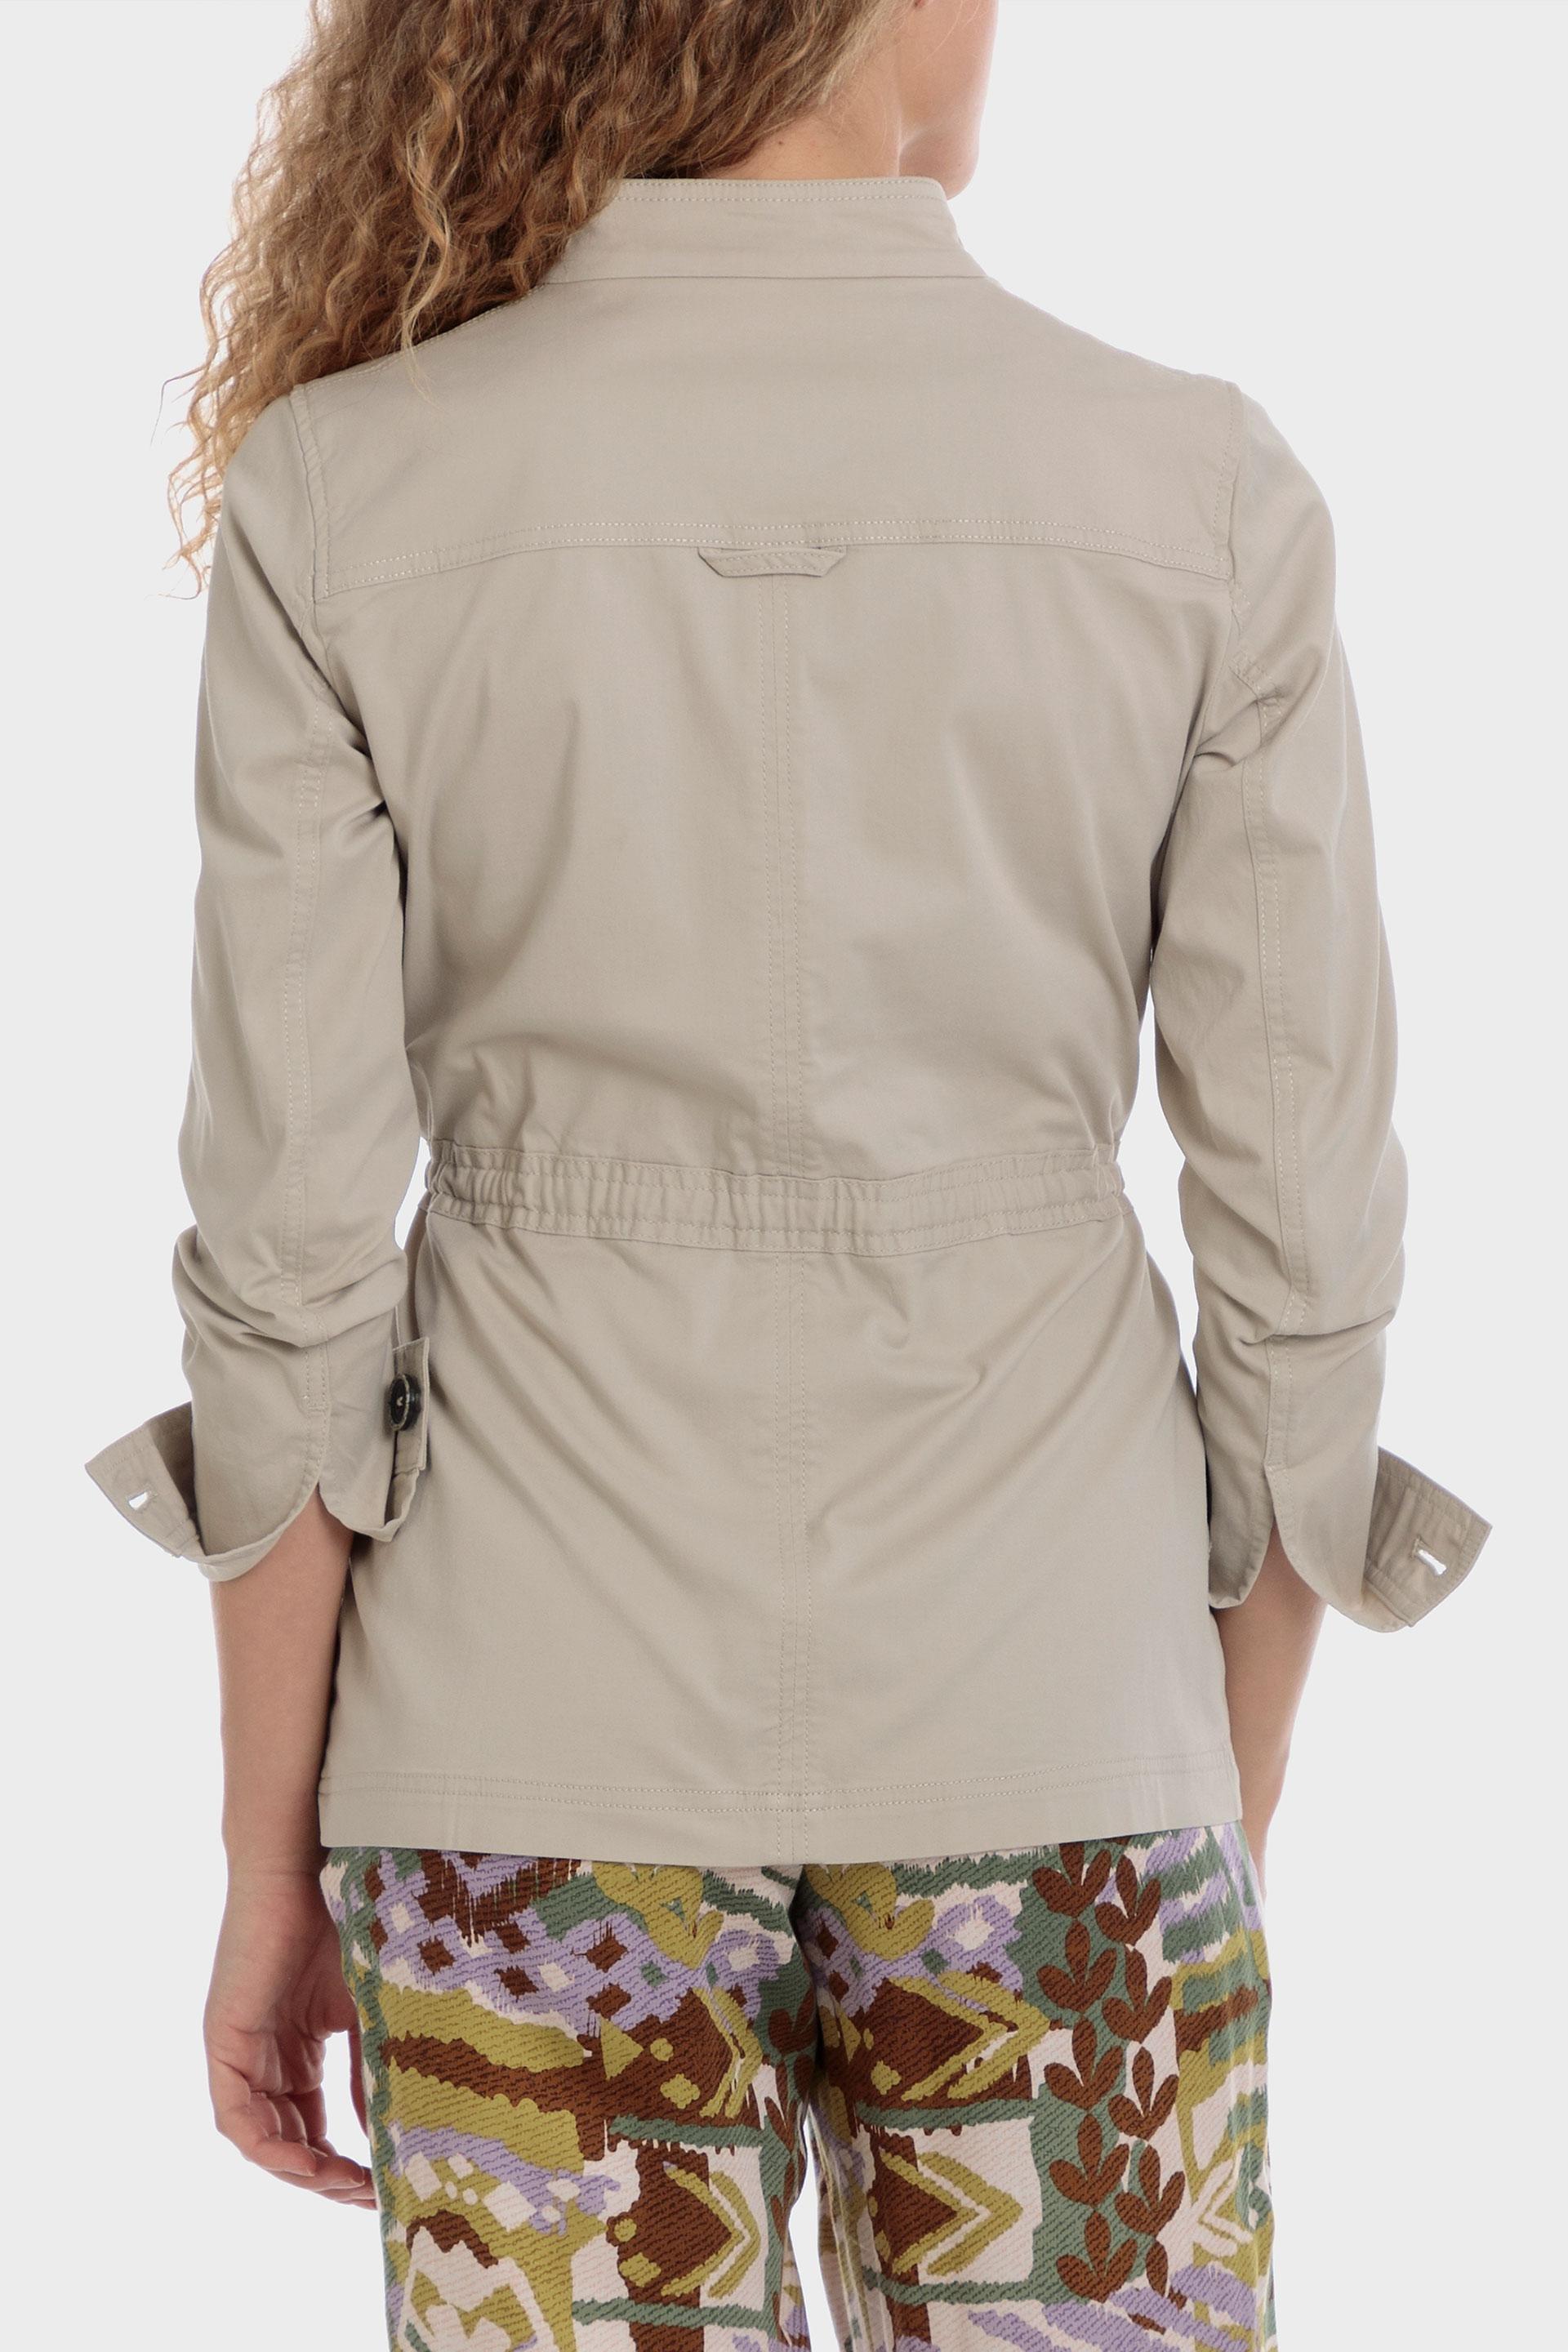 Punt Roma - Beige Jacket With Pockets